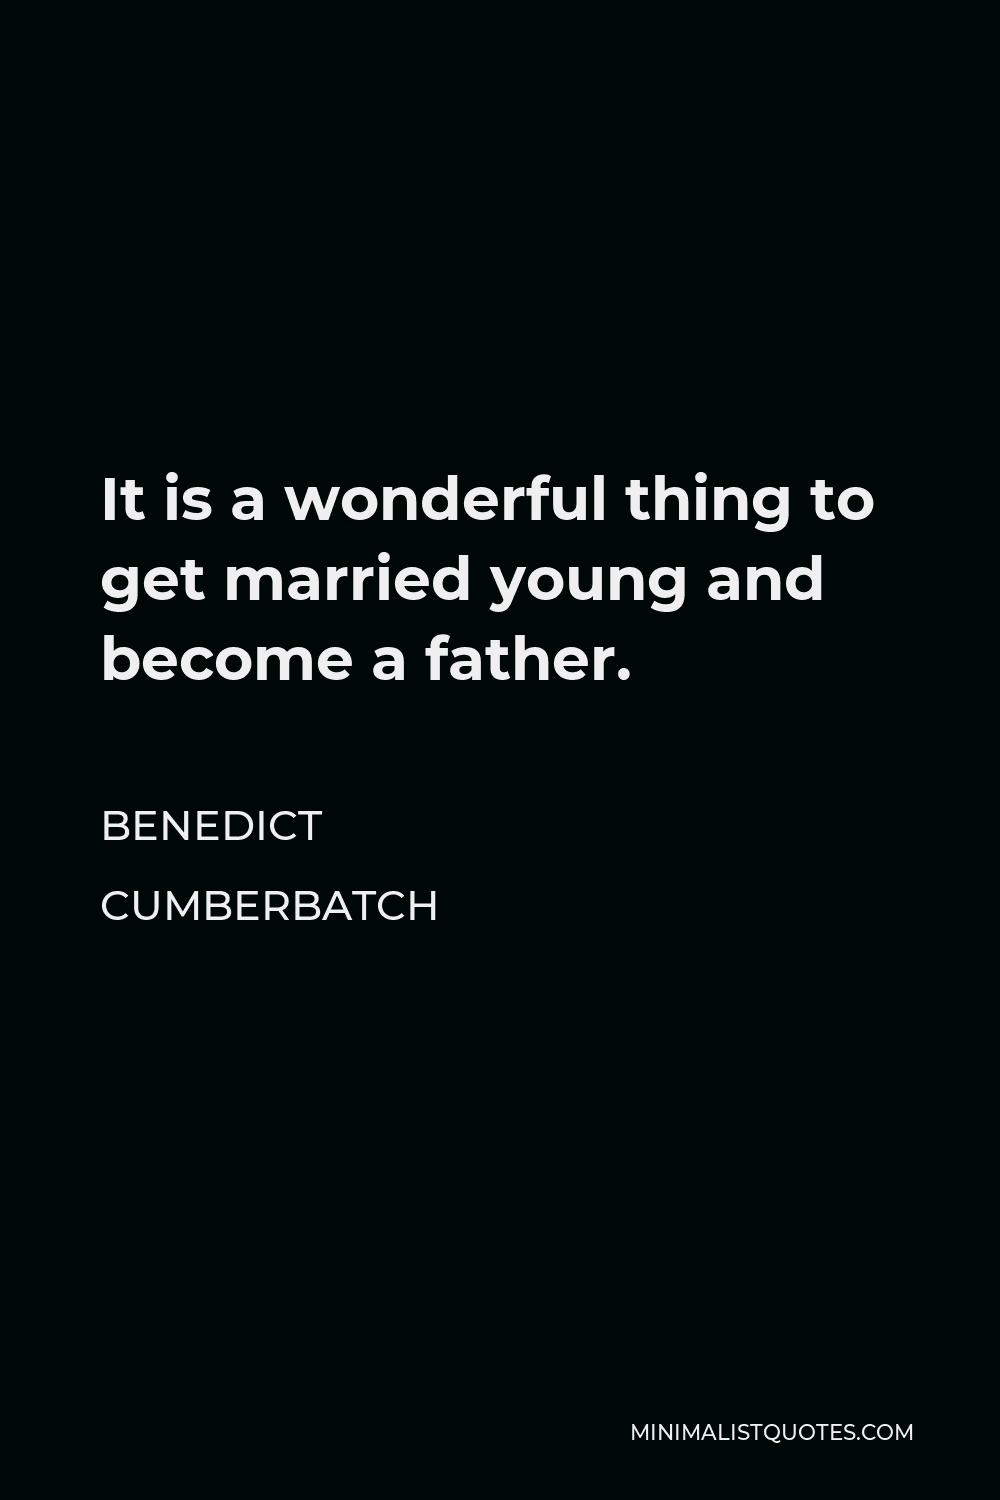 Benedict Cumberbatch Quote - It is a wonderful thing to get married young and become a father.